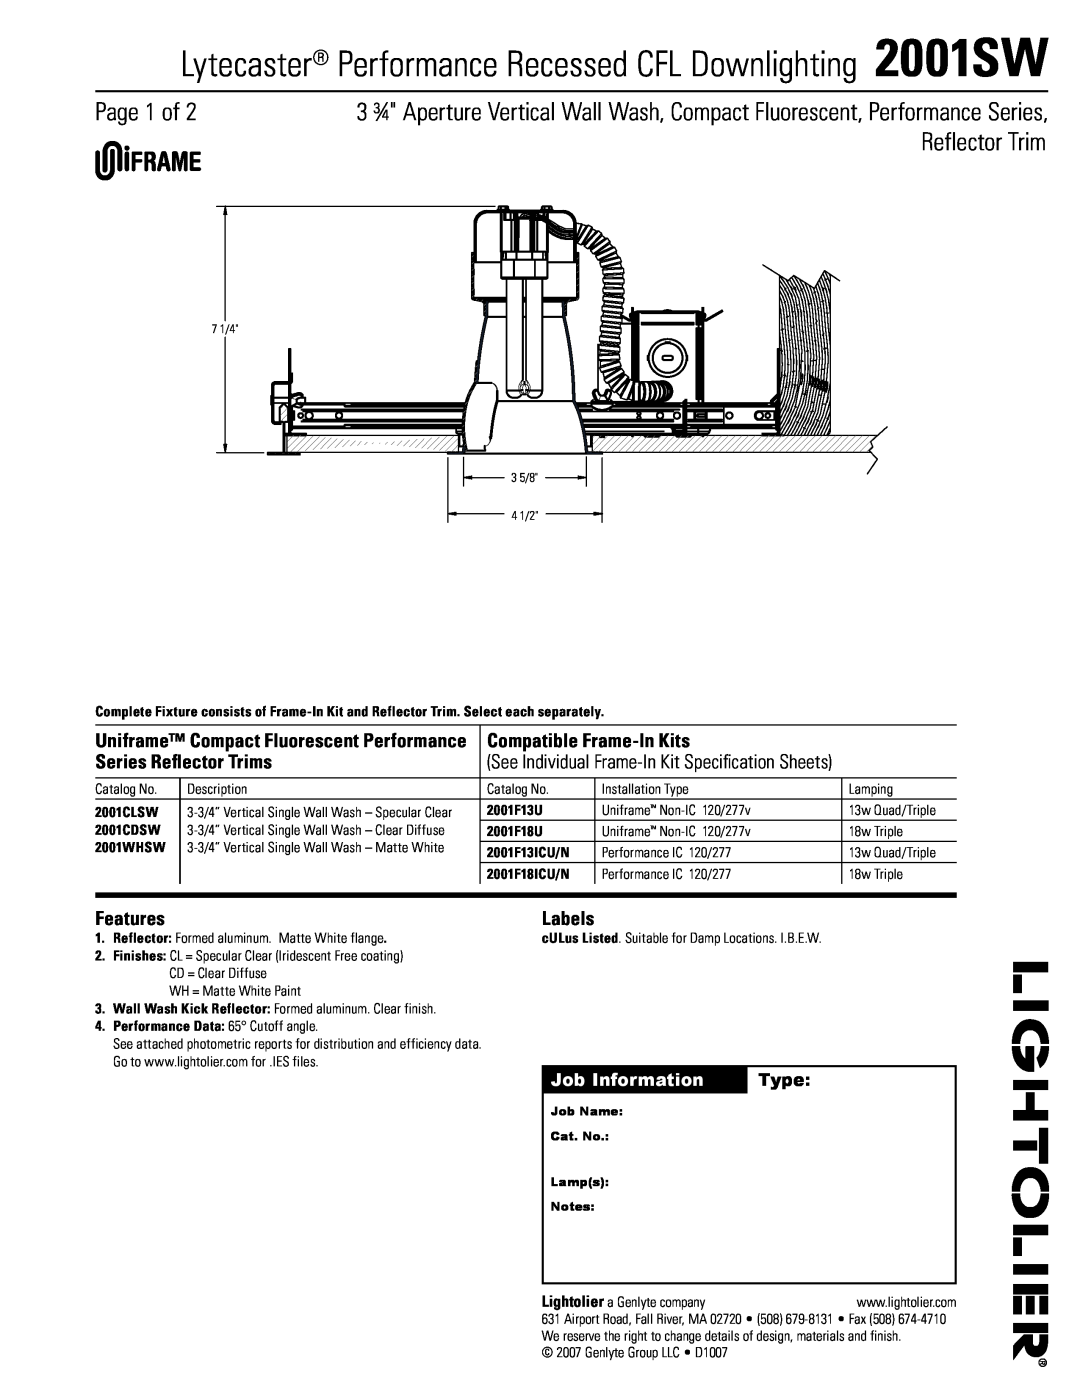 Lightolier 2001SW specifications Page of, Reflector Trim, Job Information, Type, Uniframe Compact Fluorescent Performance 